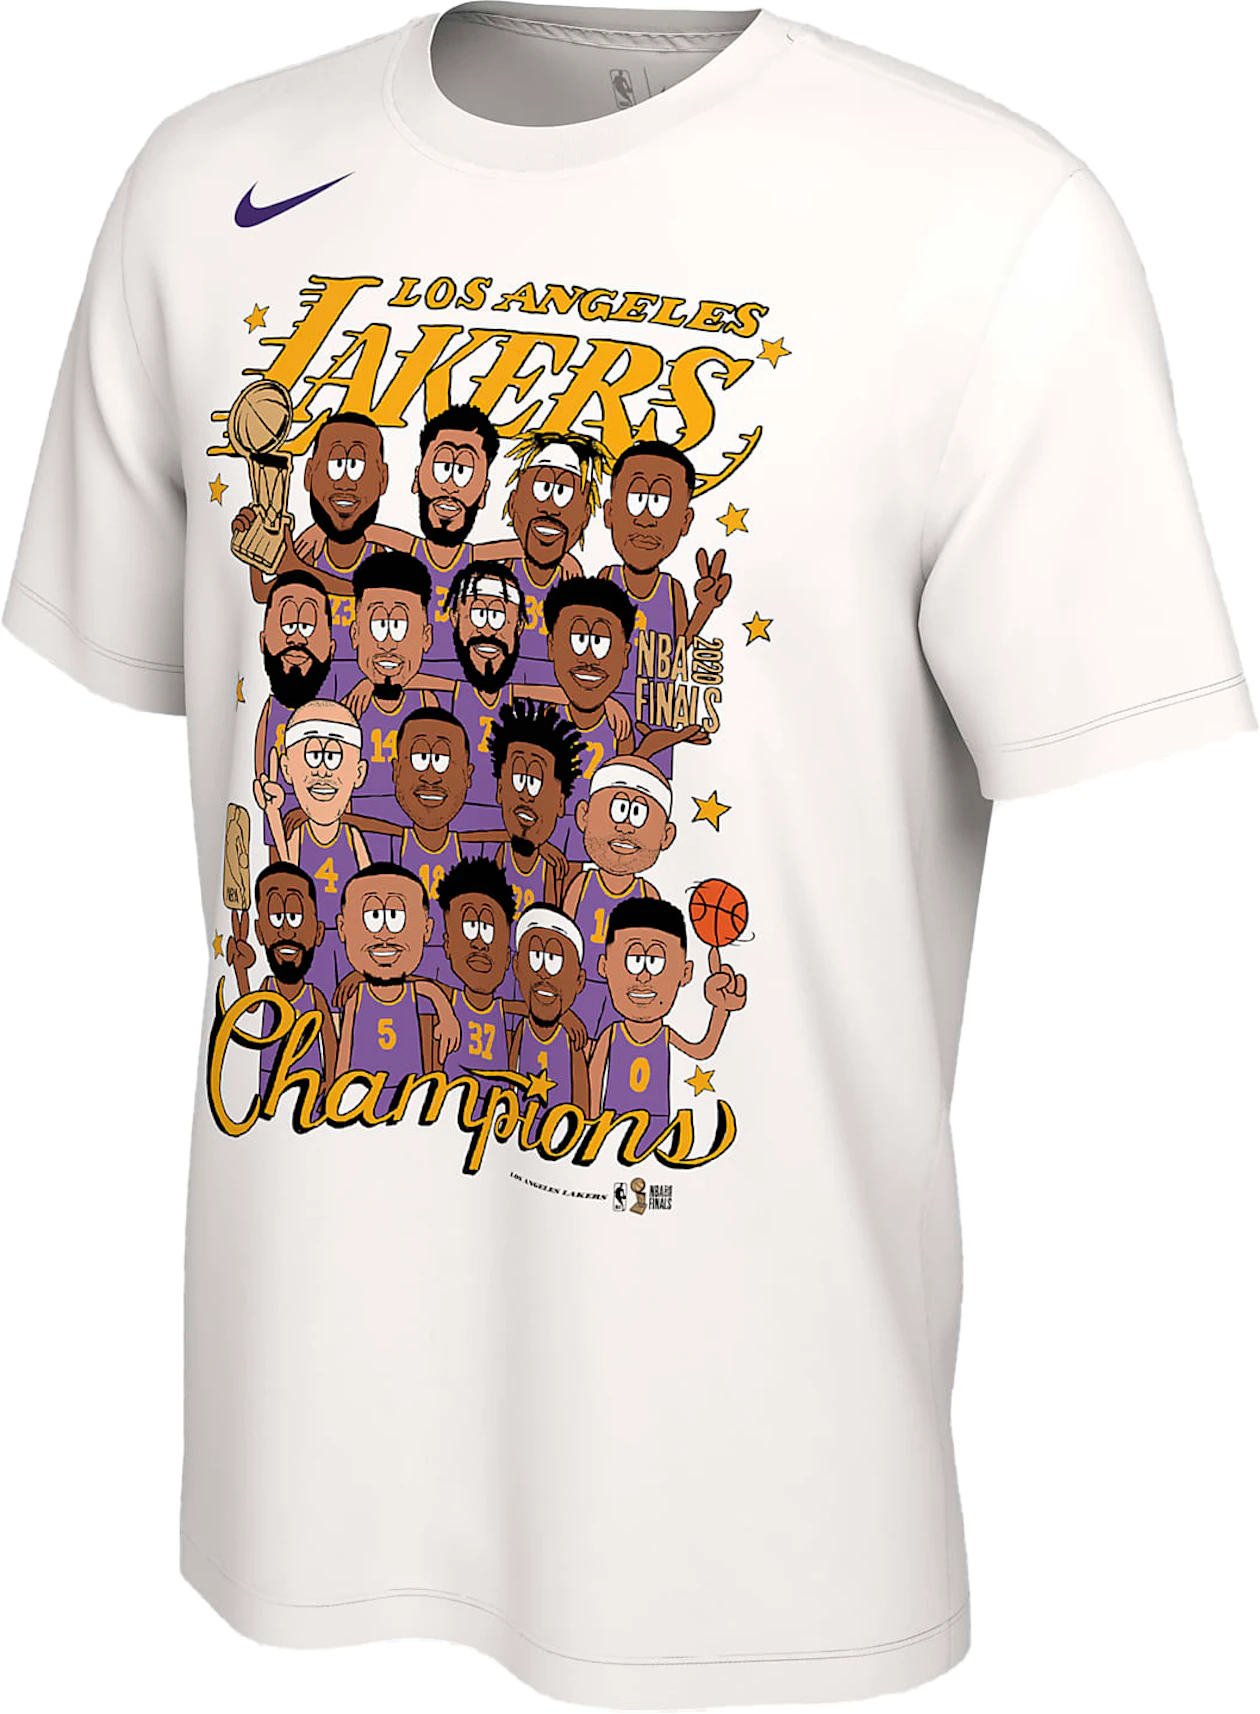 Nike Los Angeles Lakers Champions Club Roster T-Shirt White - FW20